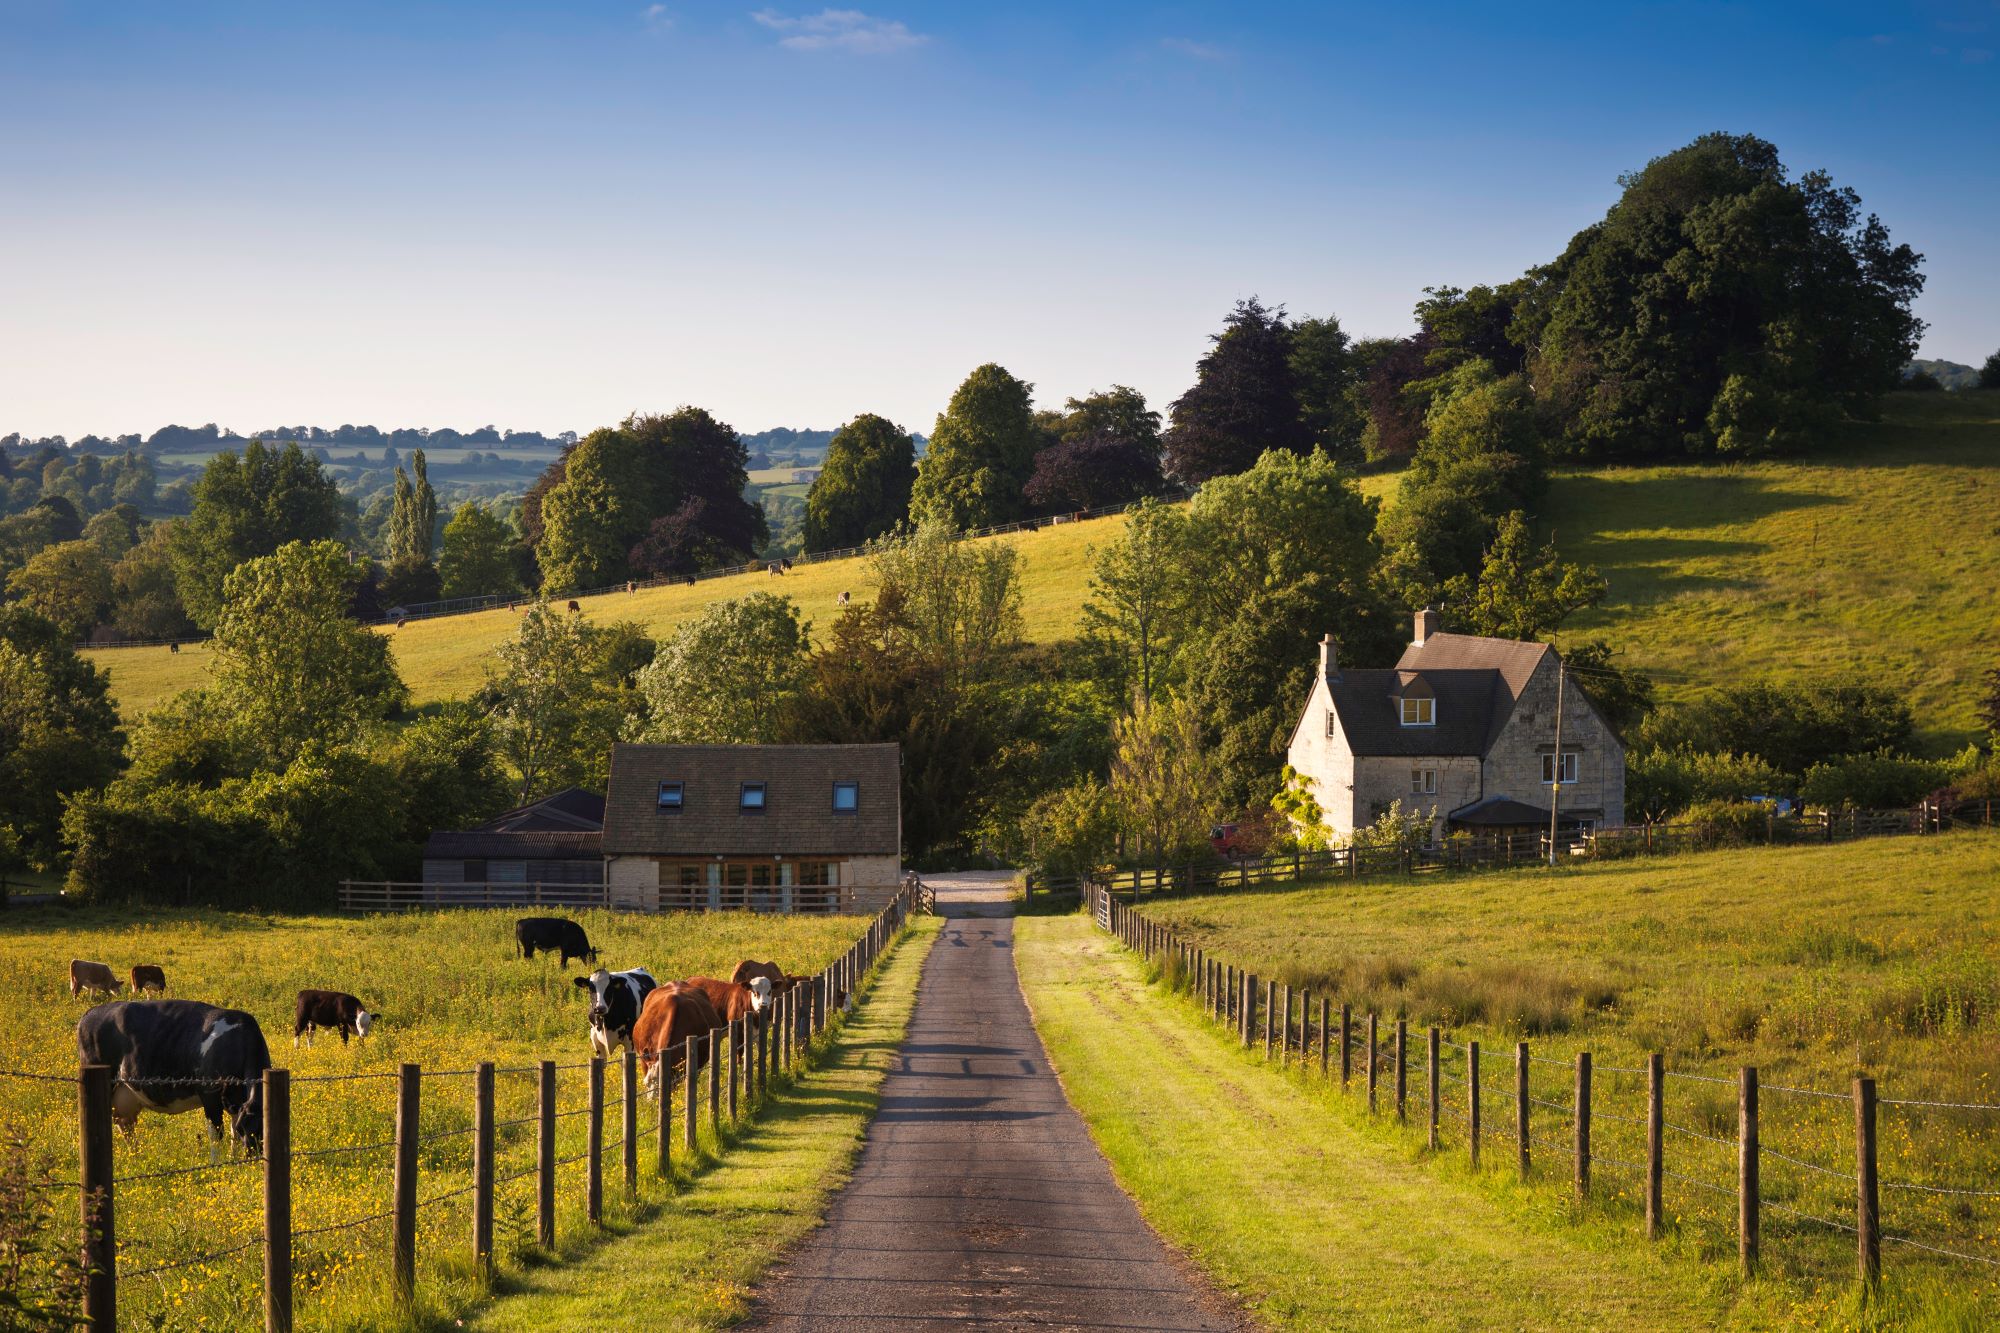 Concept for Partnership pitfalls - Farmland with farmhouse and grazing cows in the UK